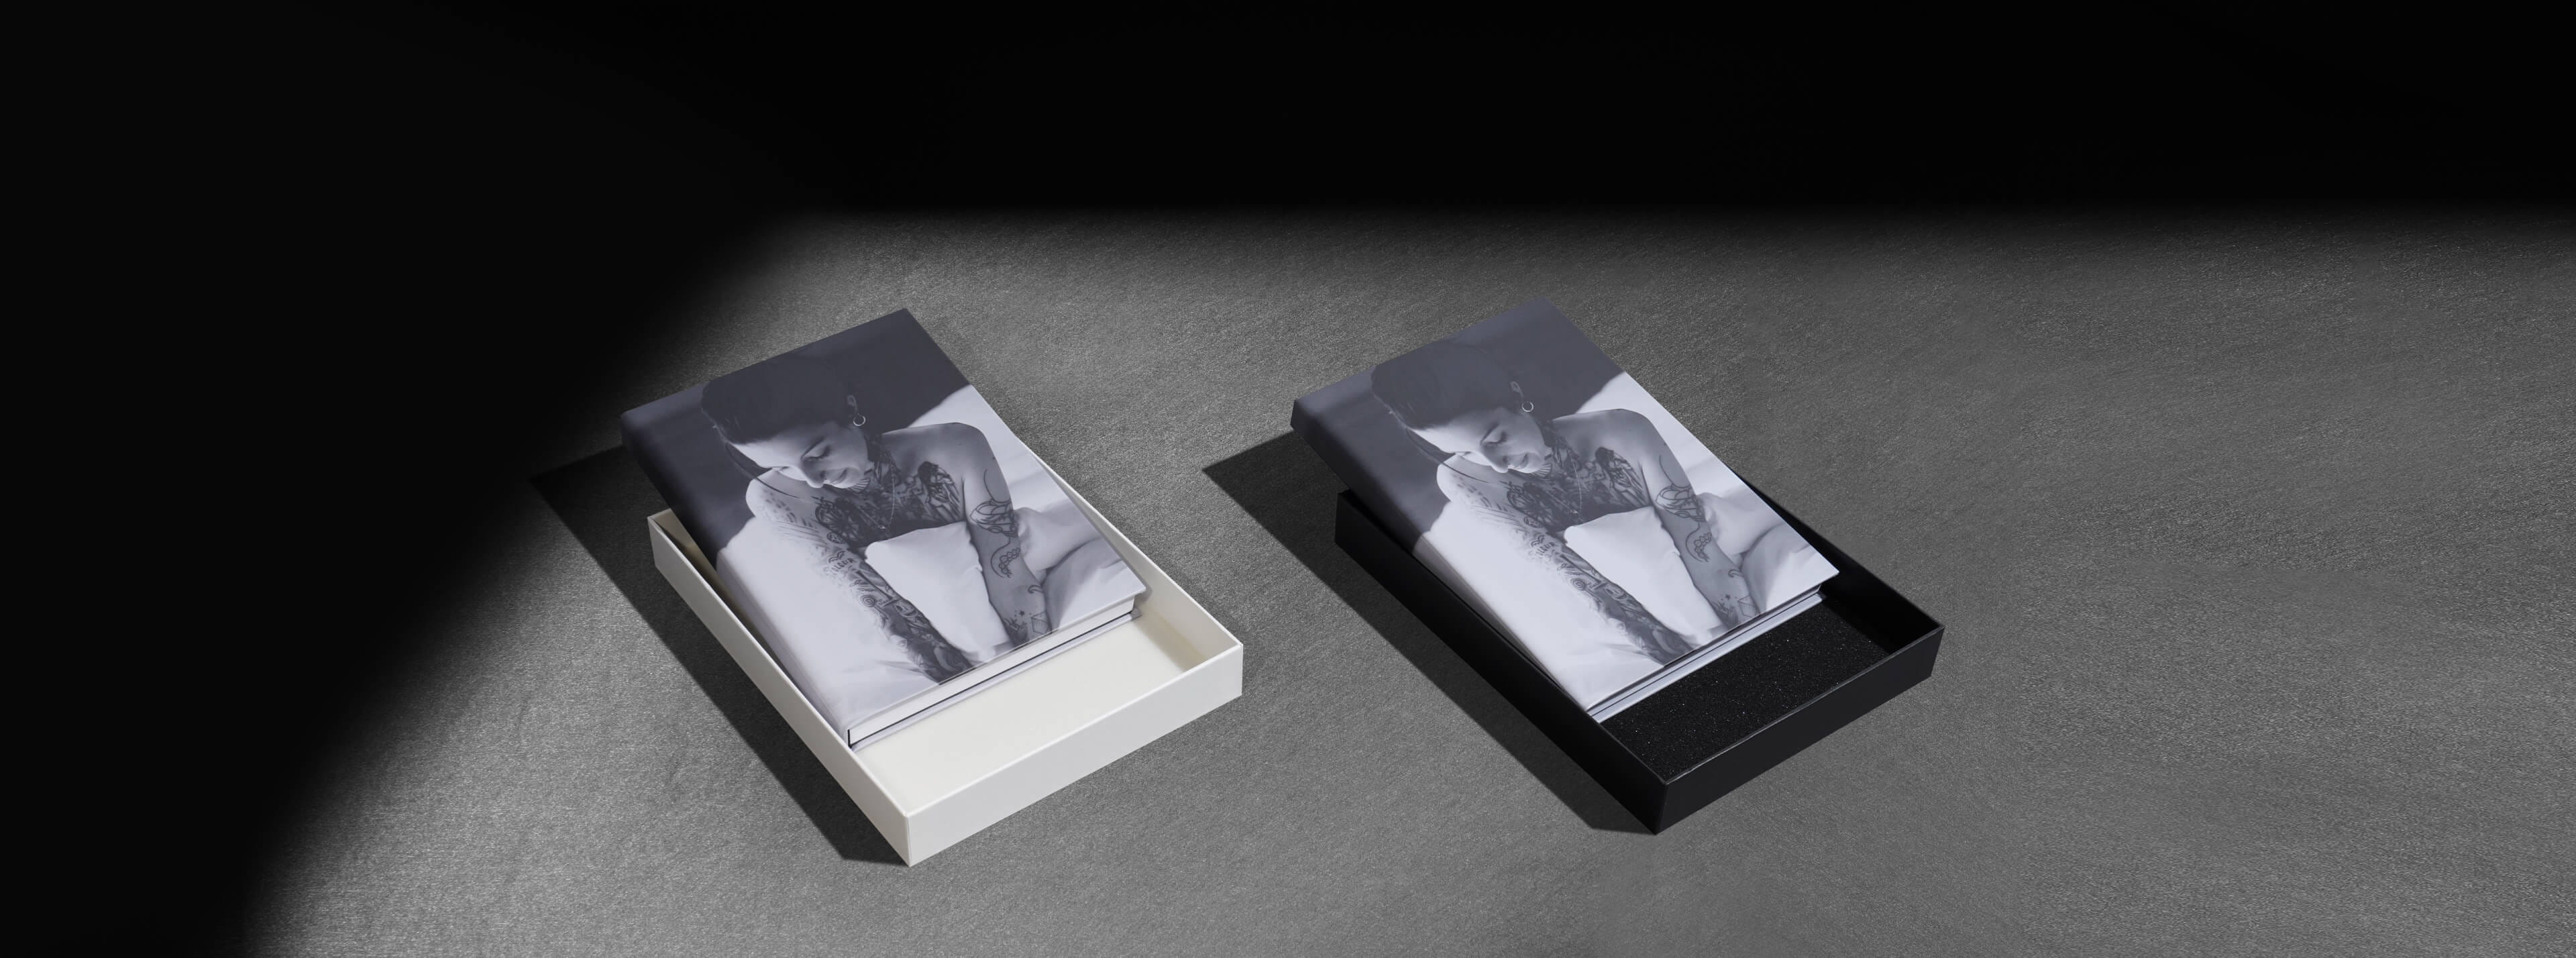 a black box and a white box that each hold the same boudoir photo album showing a semi nude woman